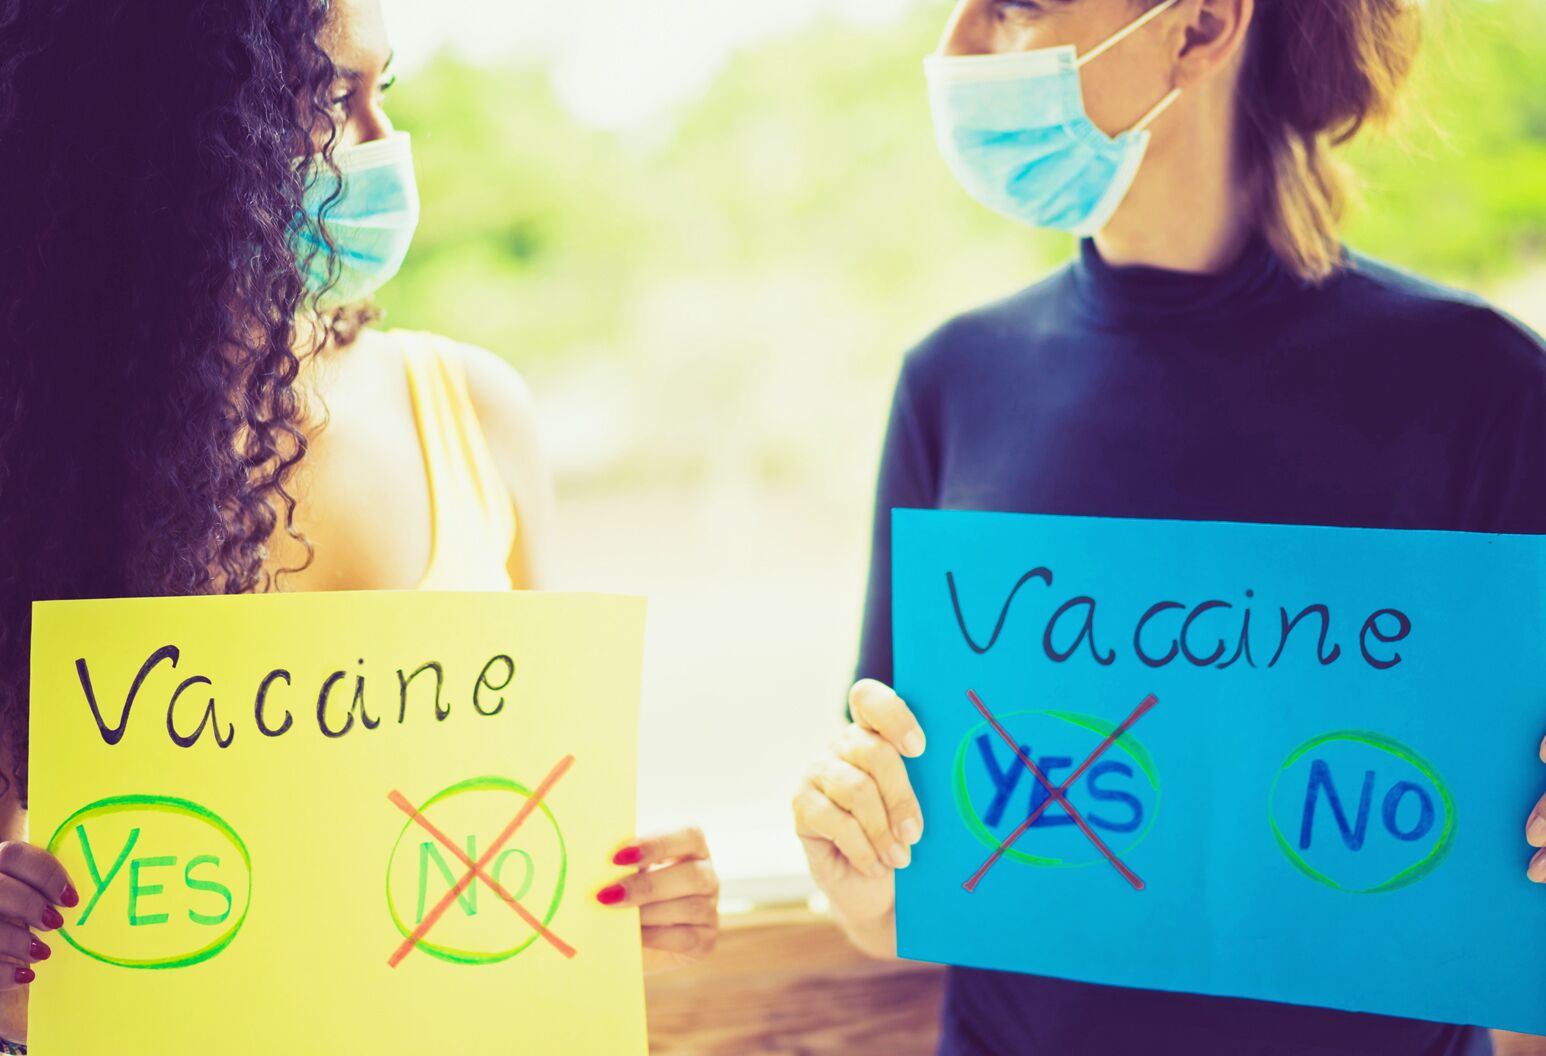 Two women hold conflicting signs about getting vaccinated, which Mark Jarrett, MD, says is critical to avoiding another outbreak of infectious disease like COVID-19.